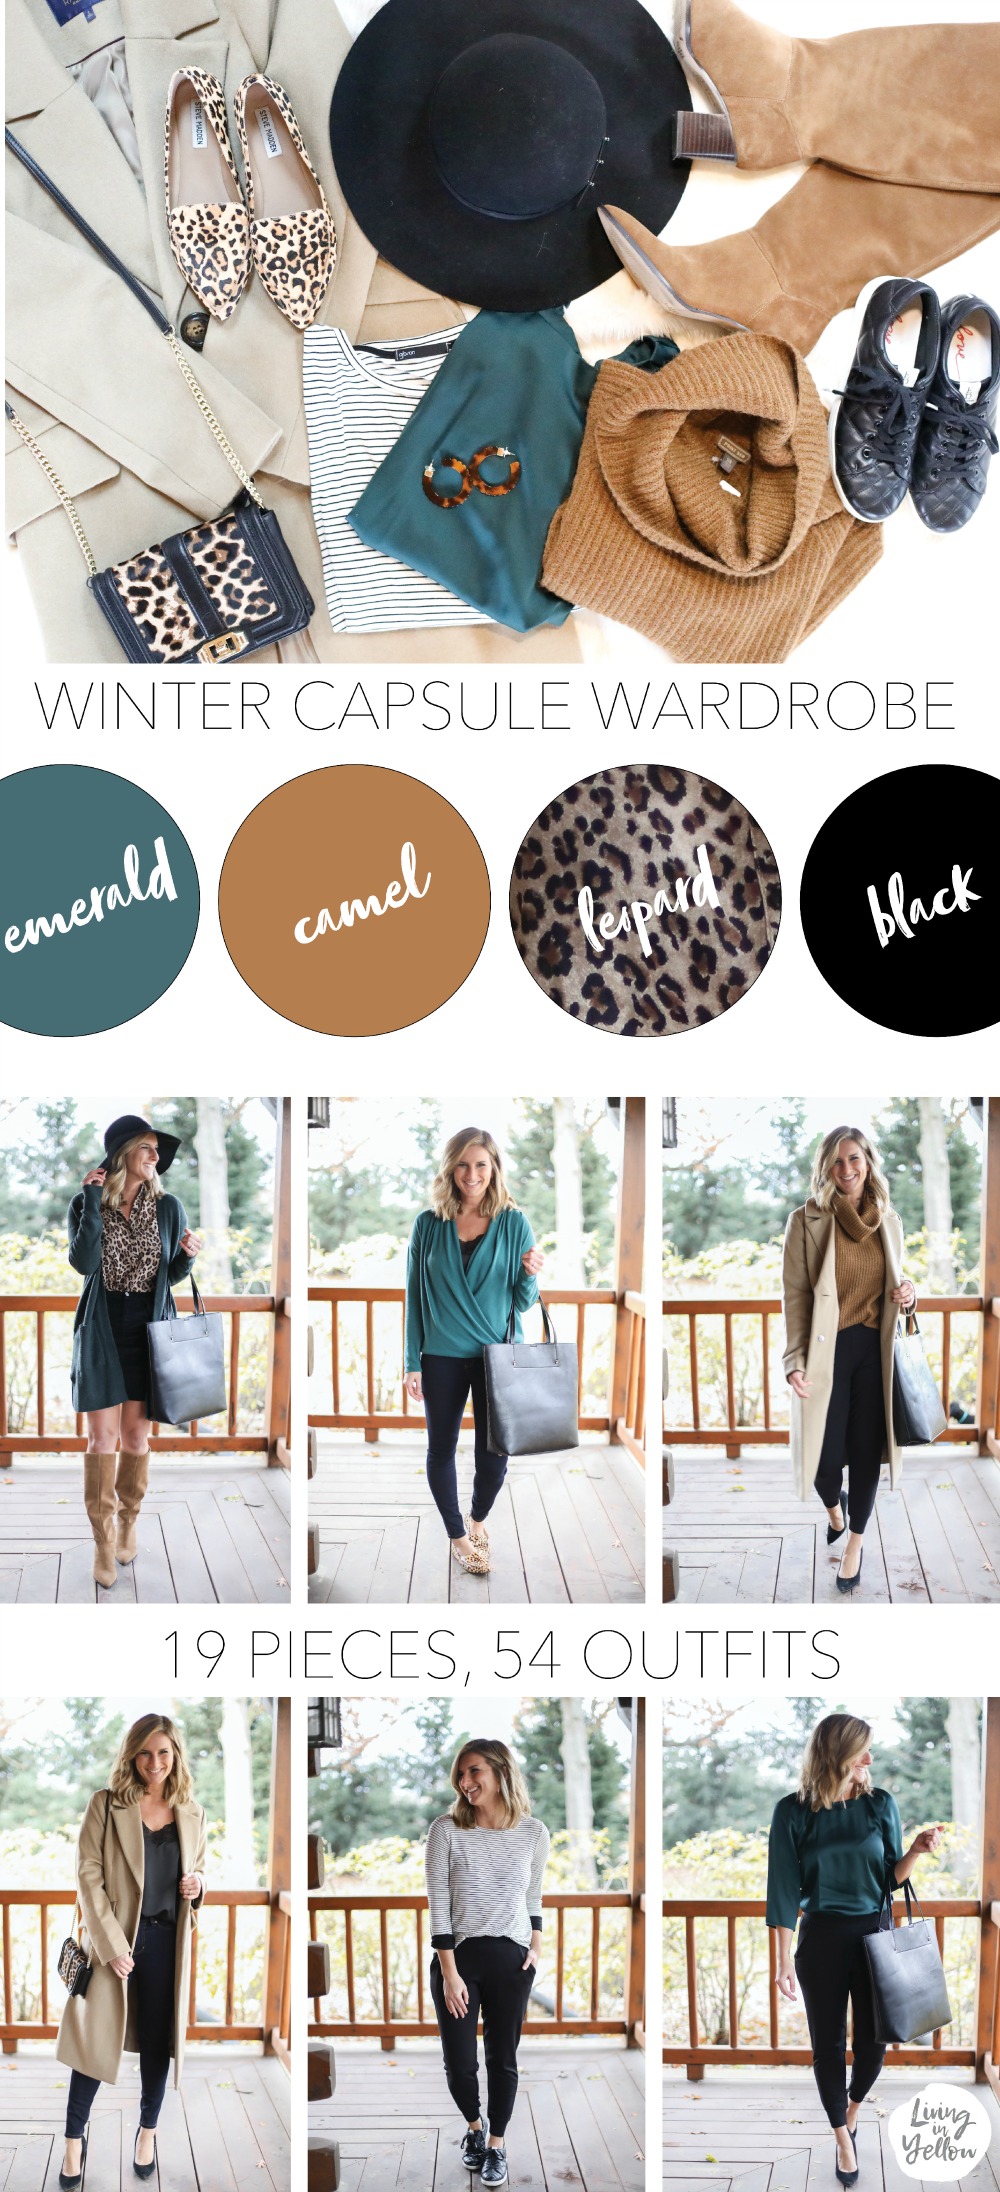 How to Build a Winter Capsule Wardrobe